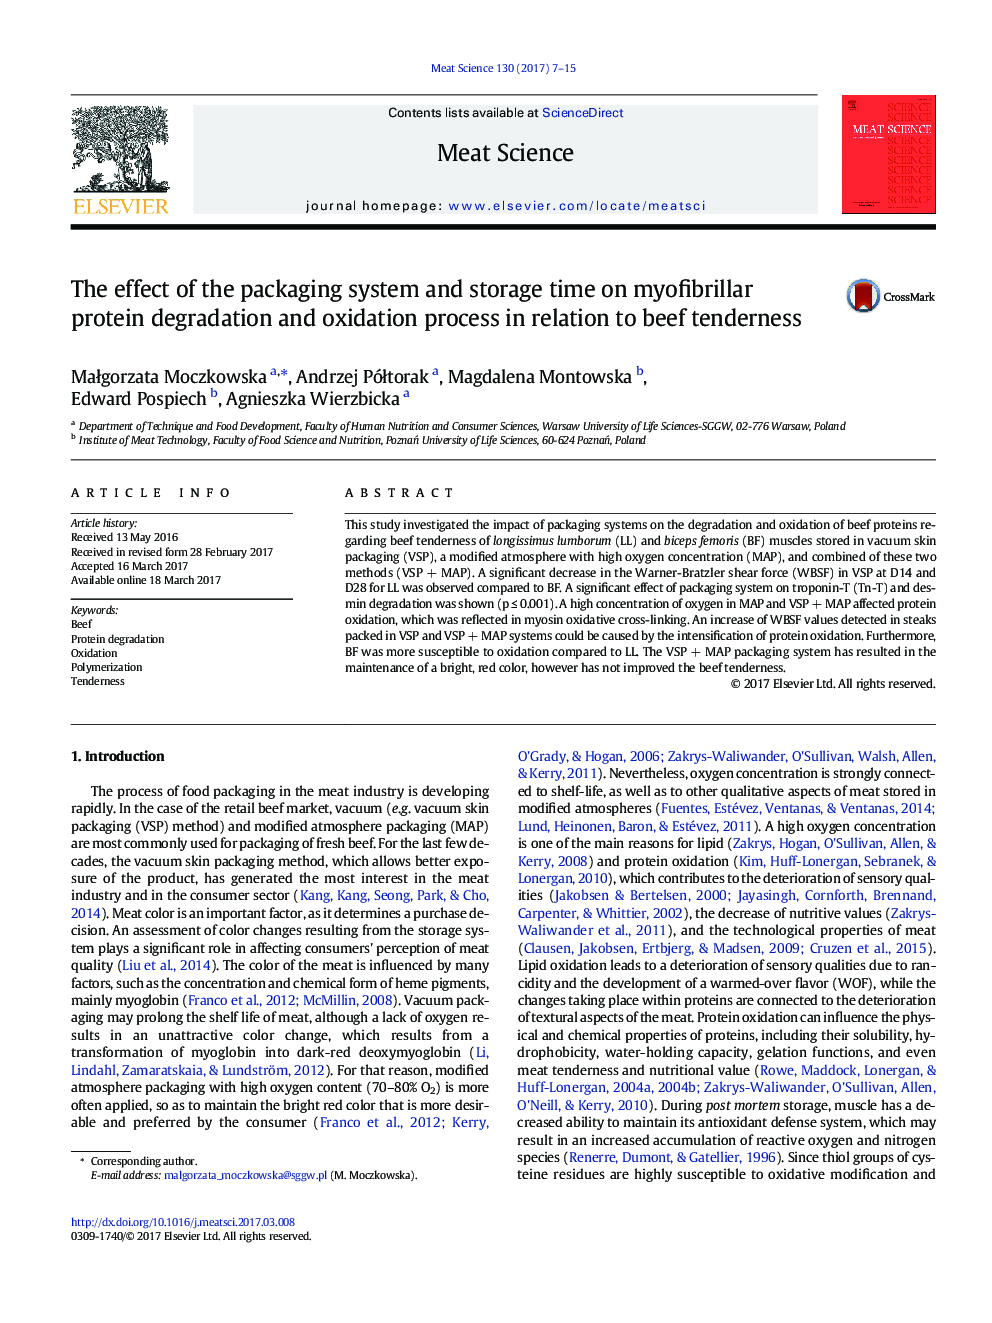 The effect of the packaging system and storage time on myofibrillar protein degradation and oxidation process in relation to beef tenderness